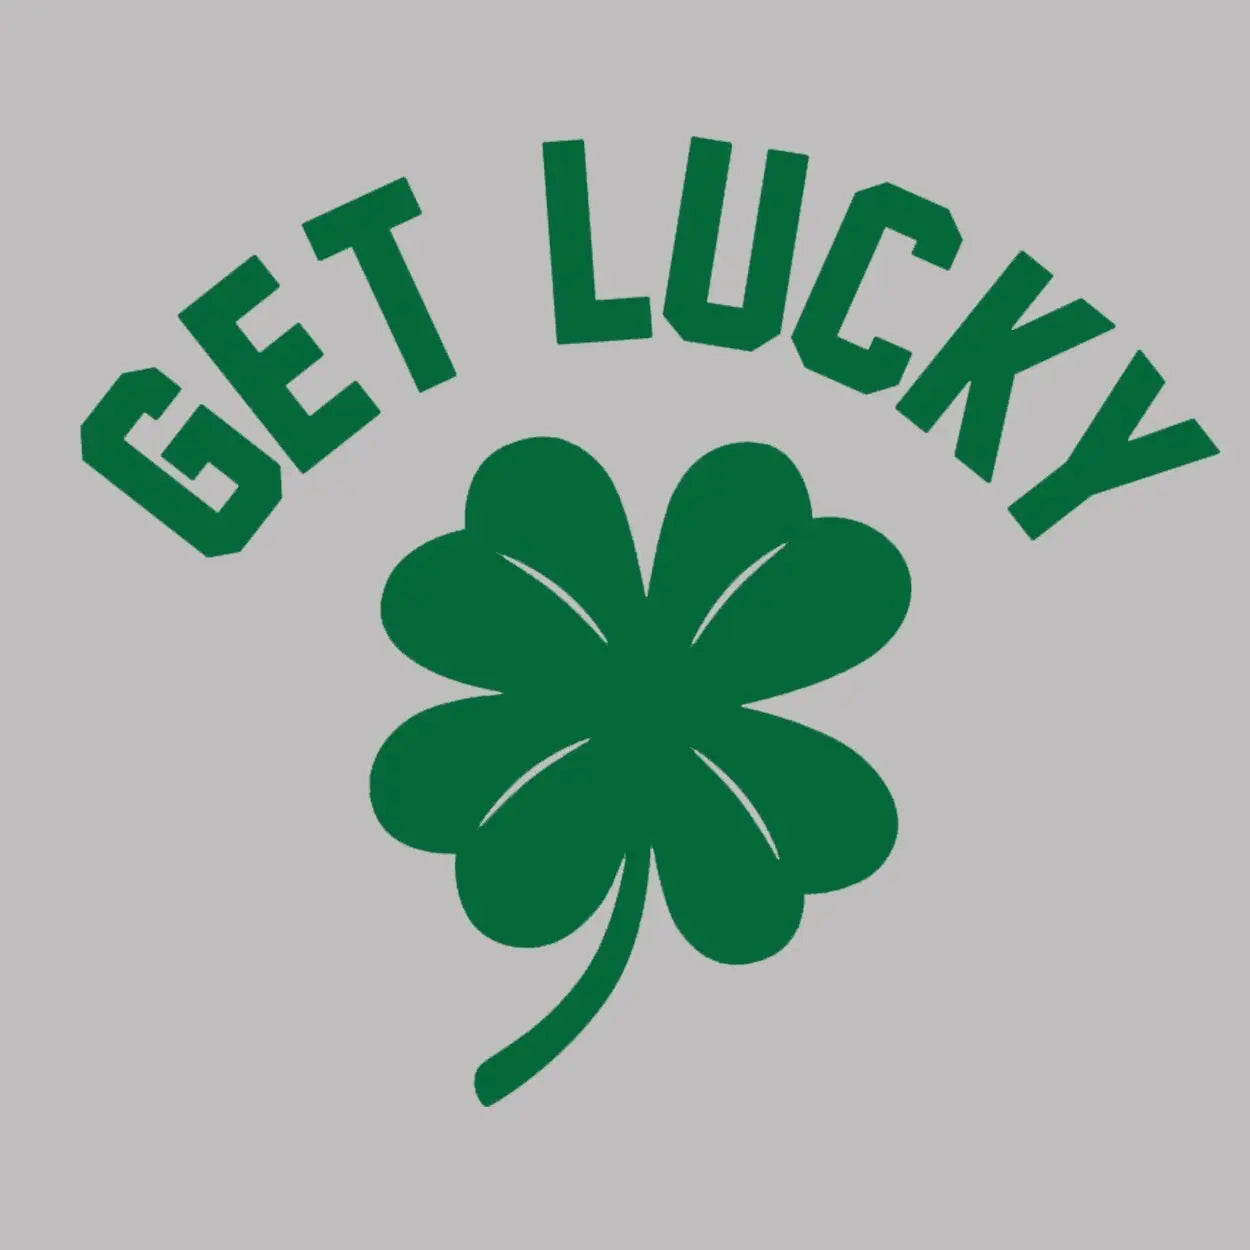 Get Lucky Clover Tshirt - Donkey Tees